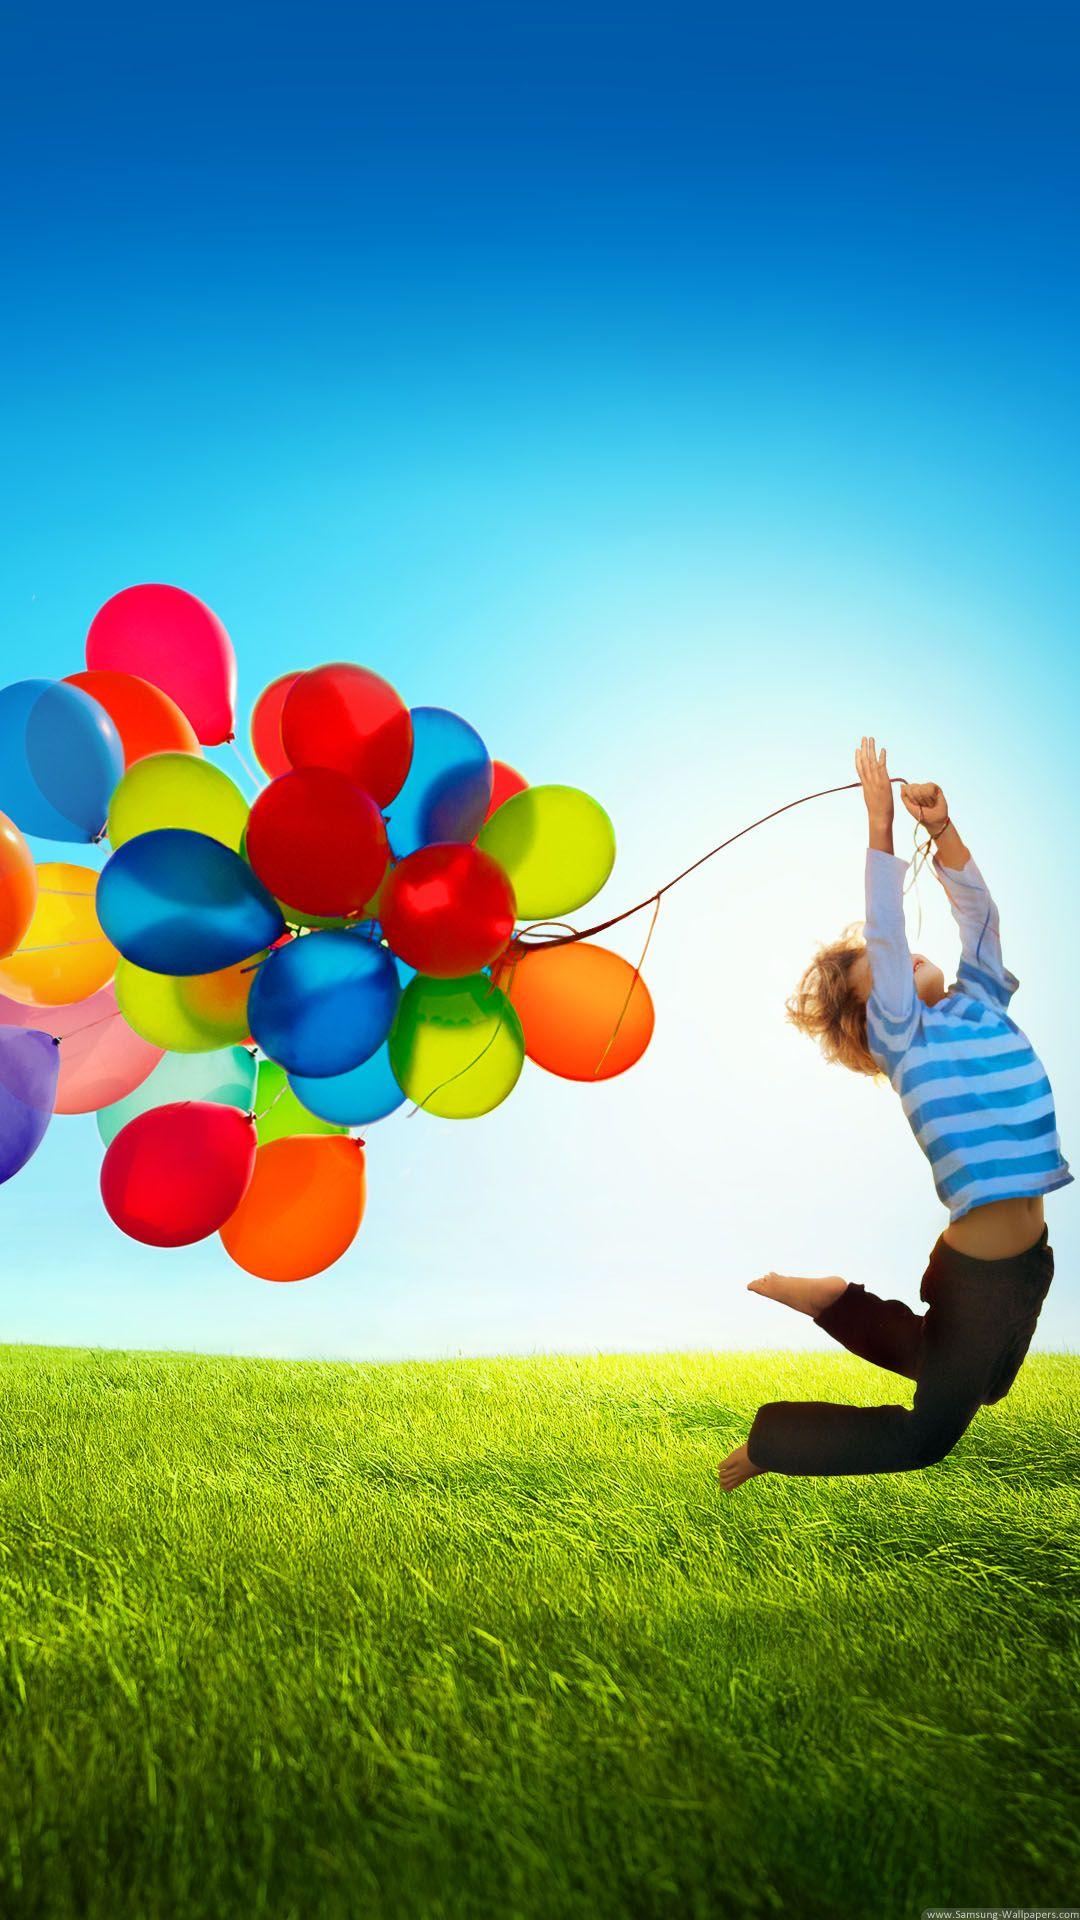 Galaxy S4 Official HD Picture Balloons 1080x1920 Desktop_Samsung